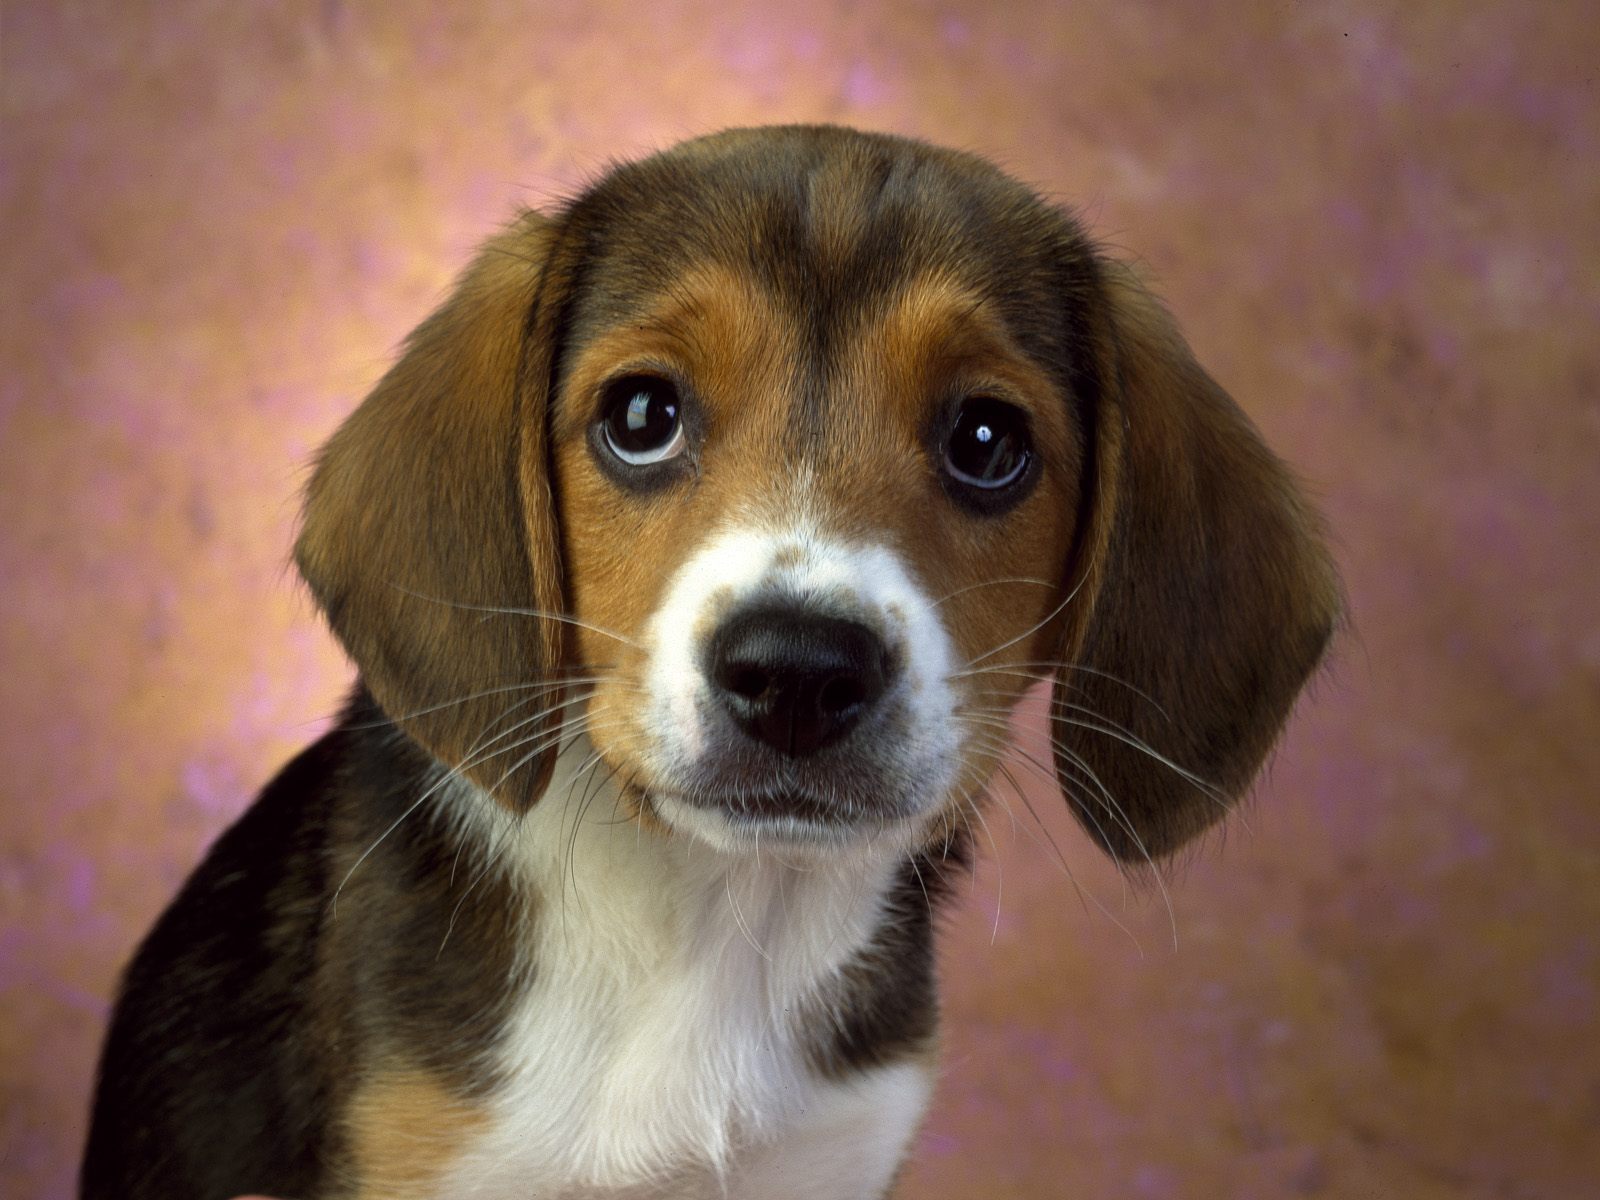 Hound Dogs Image Beagle Puppy Dog HD Wallpaper And